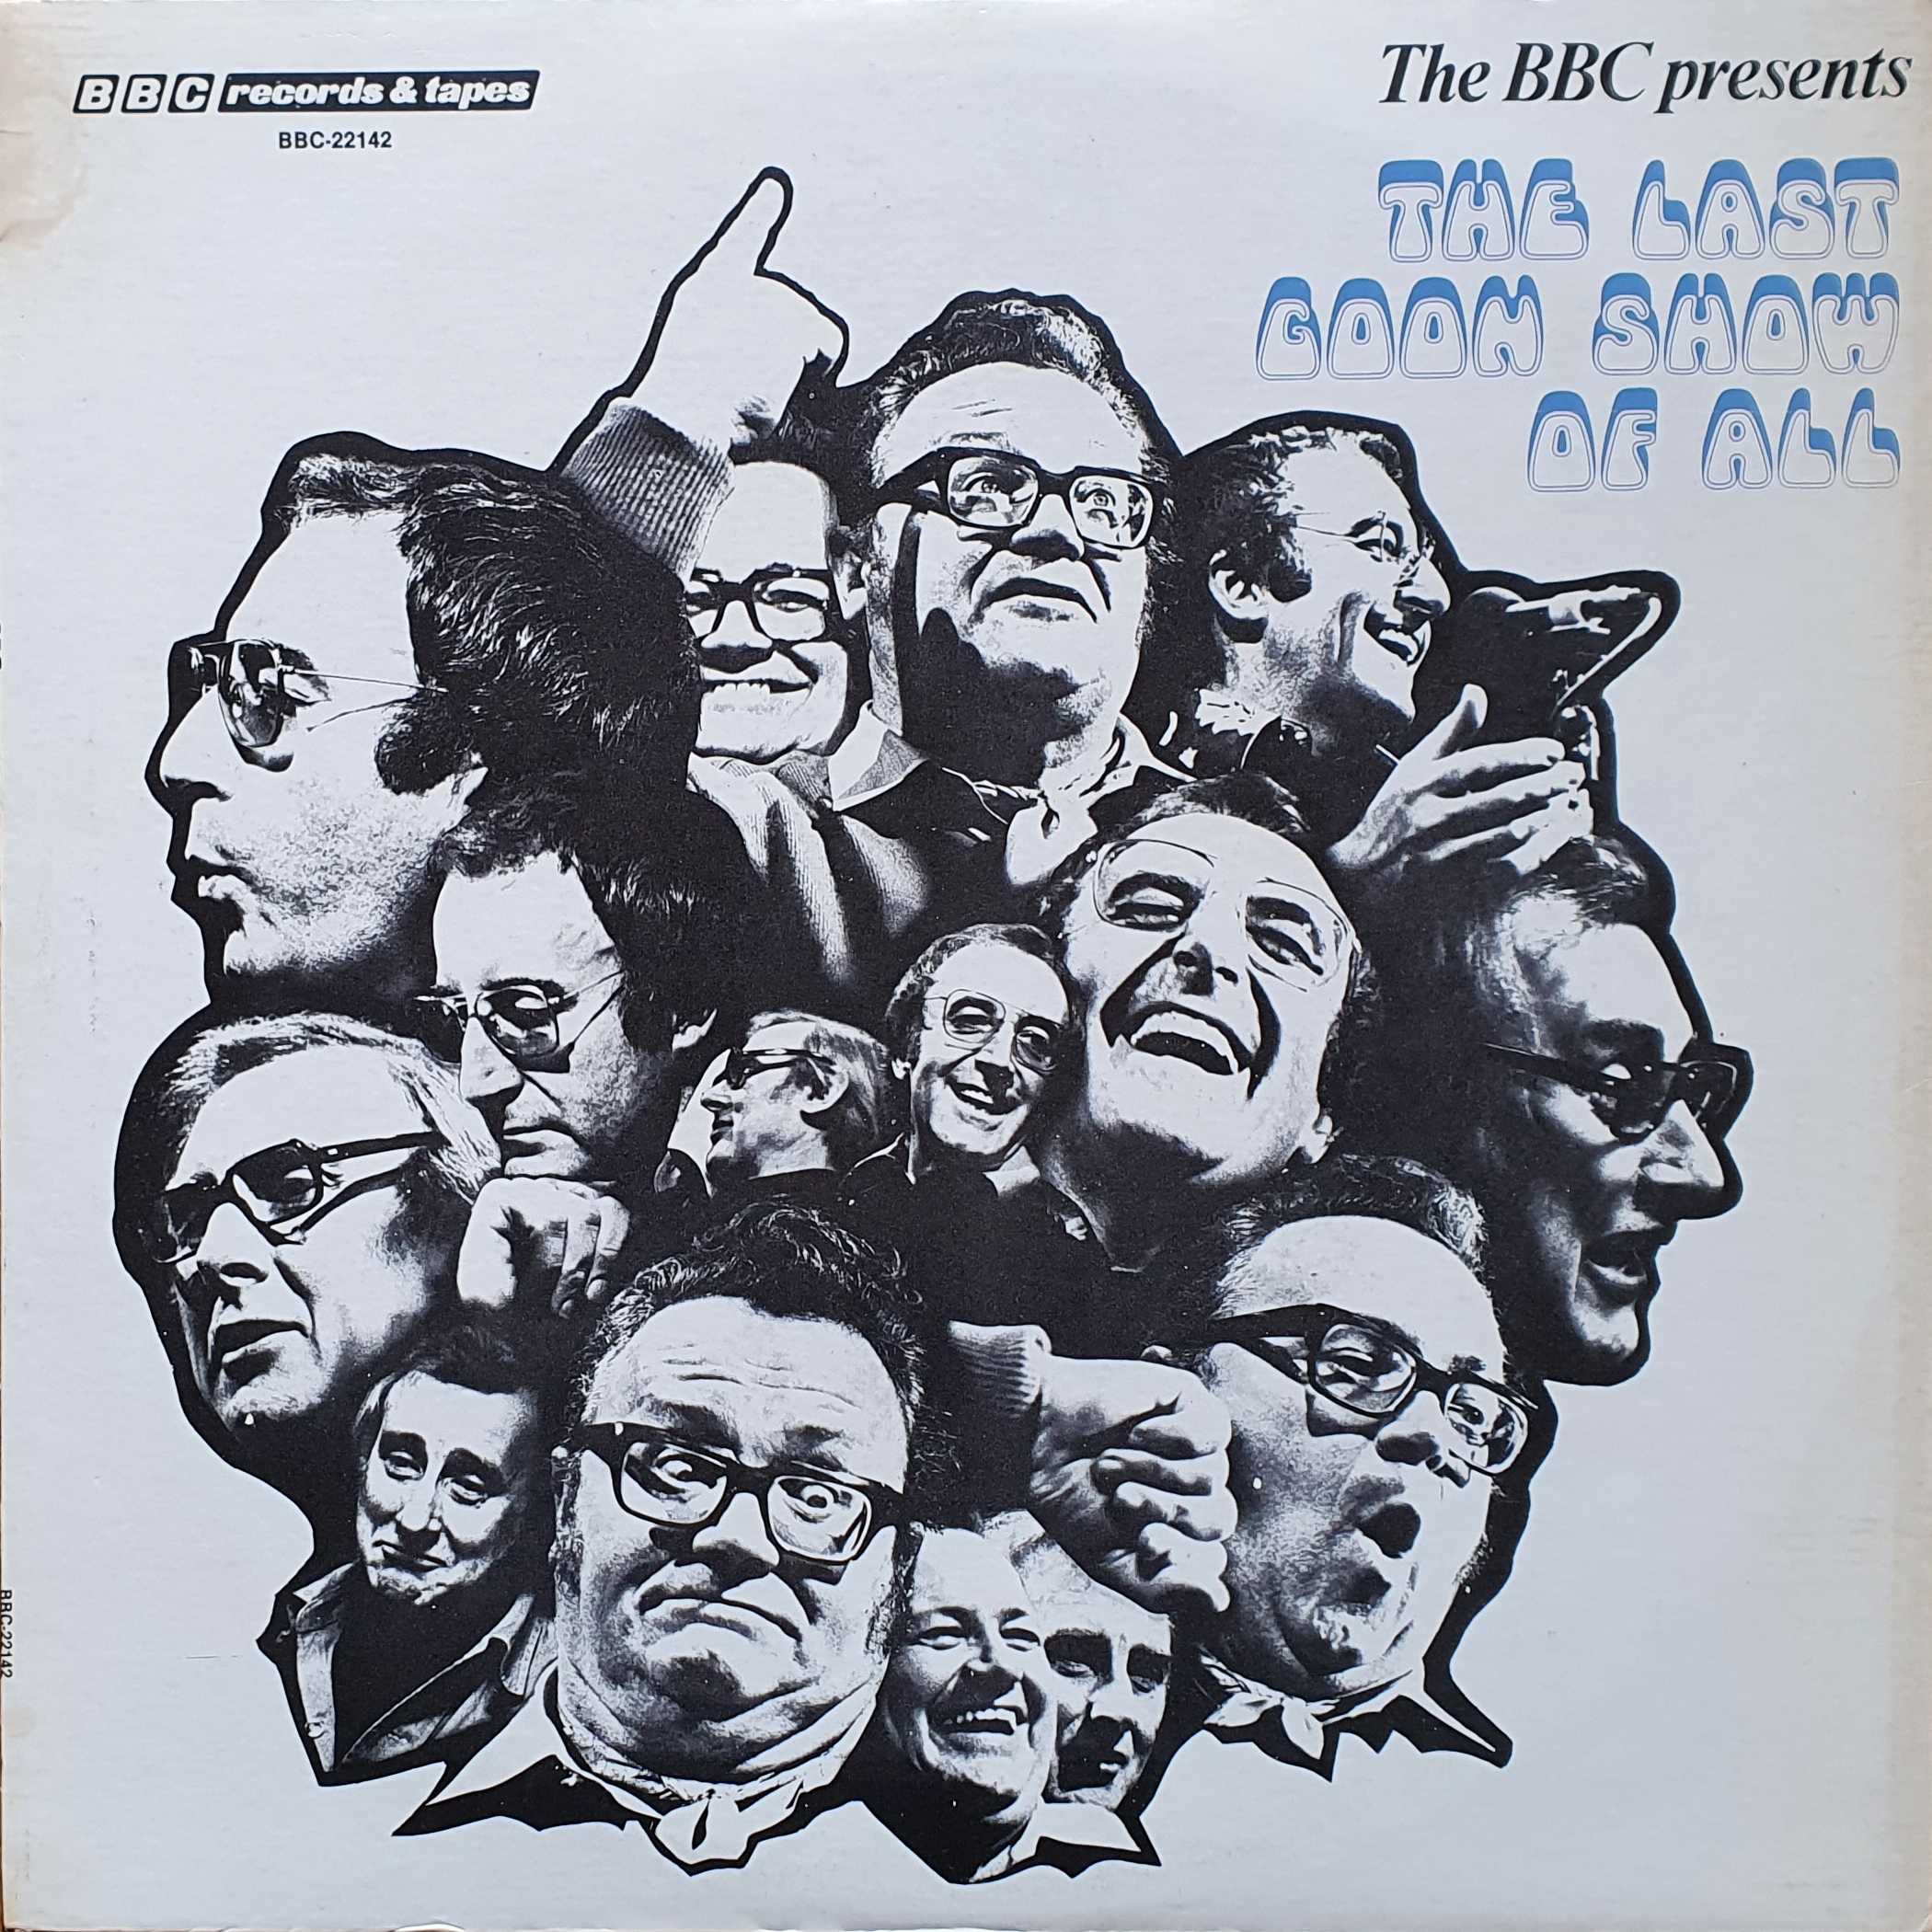 Picture of The last Goon show of all by artist Spike Milligan from the BBC albums - Records and Tapes library